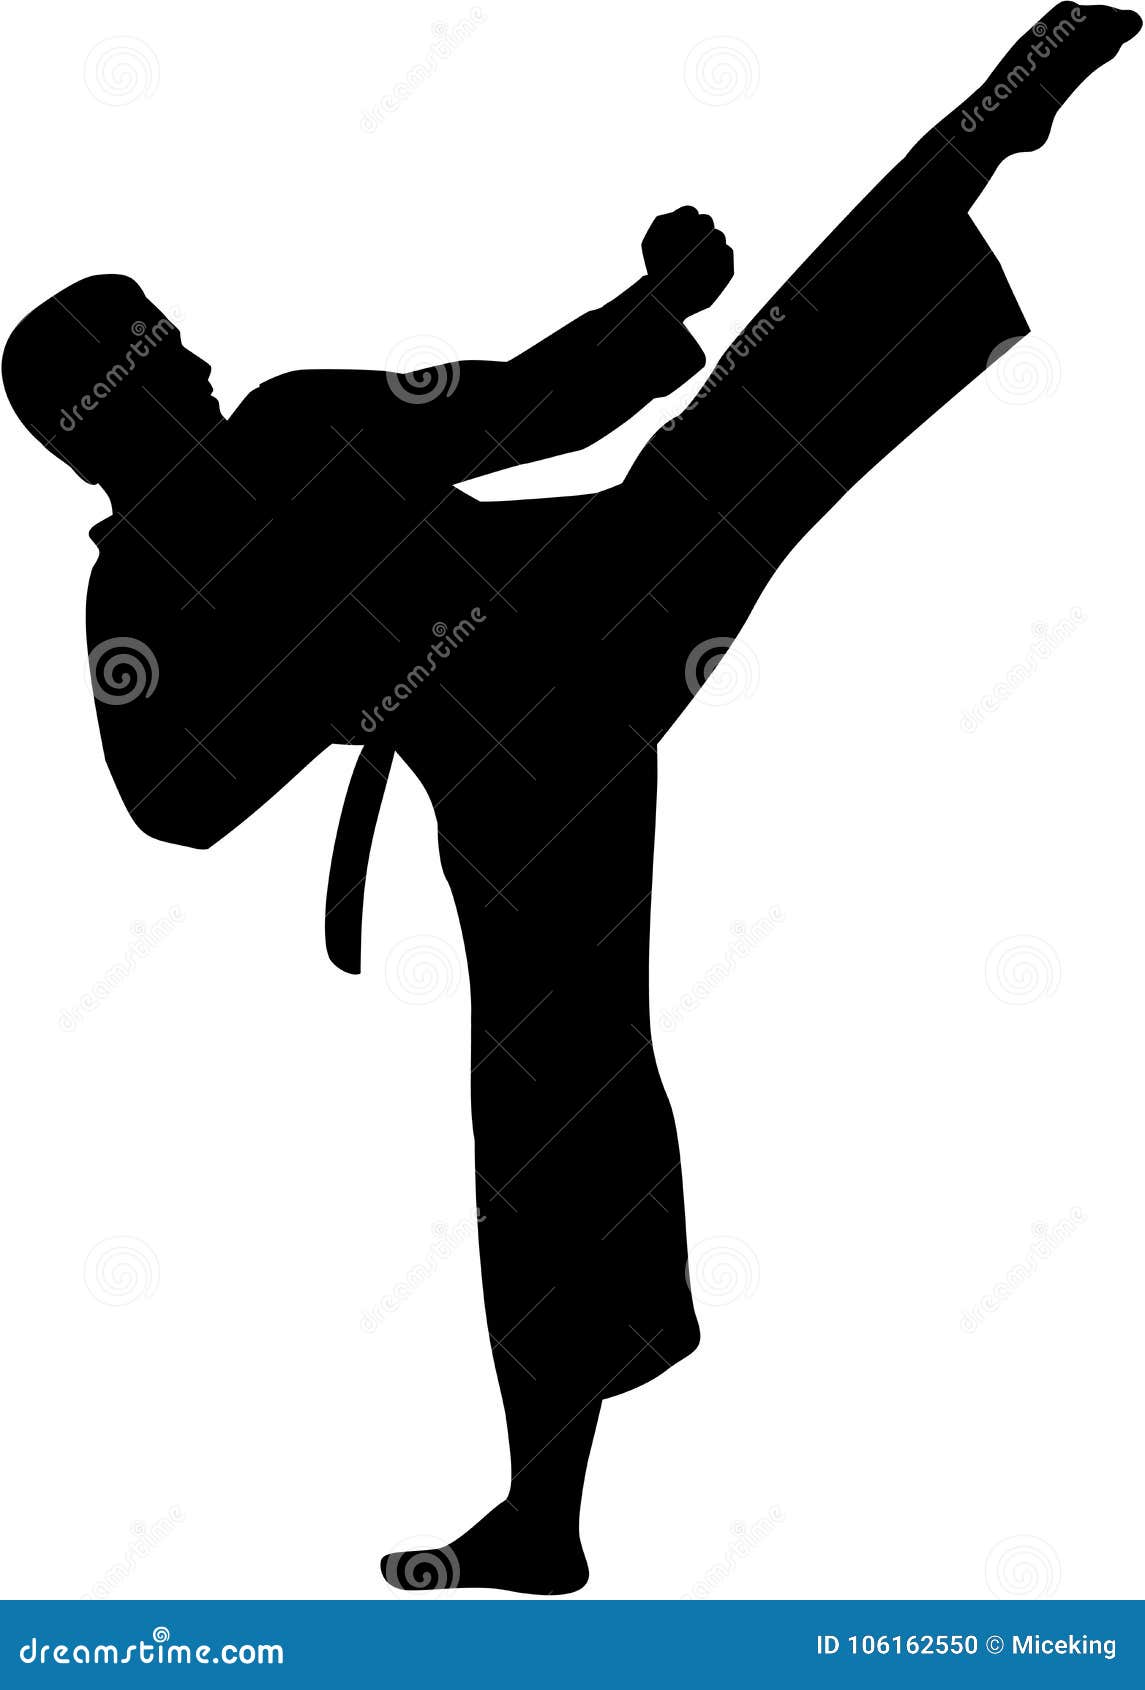 karate fighter silhouette